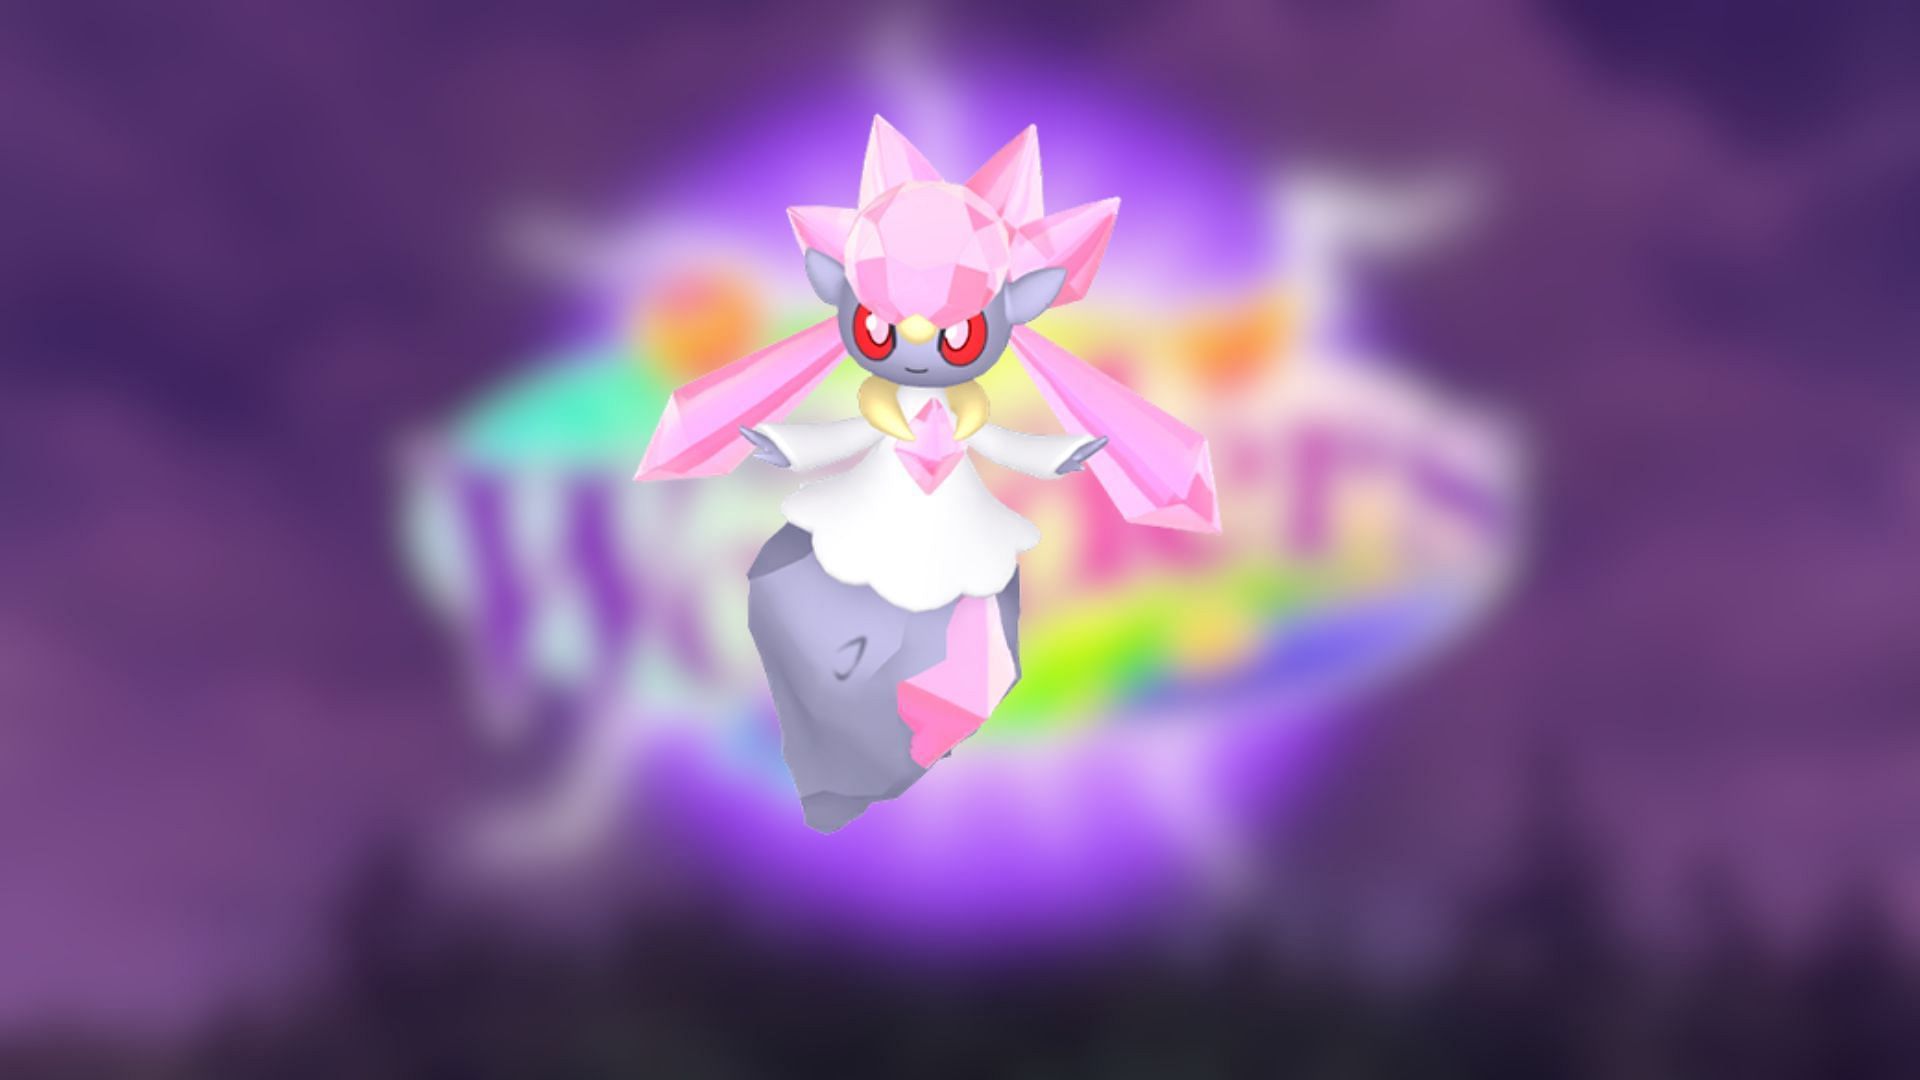 How to get Diancie in Pokemon GO